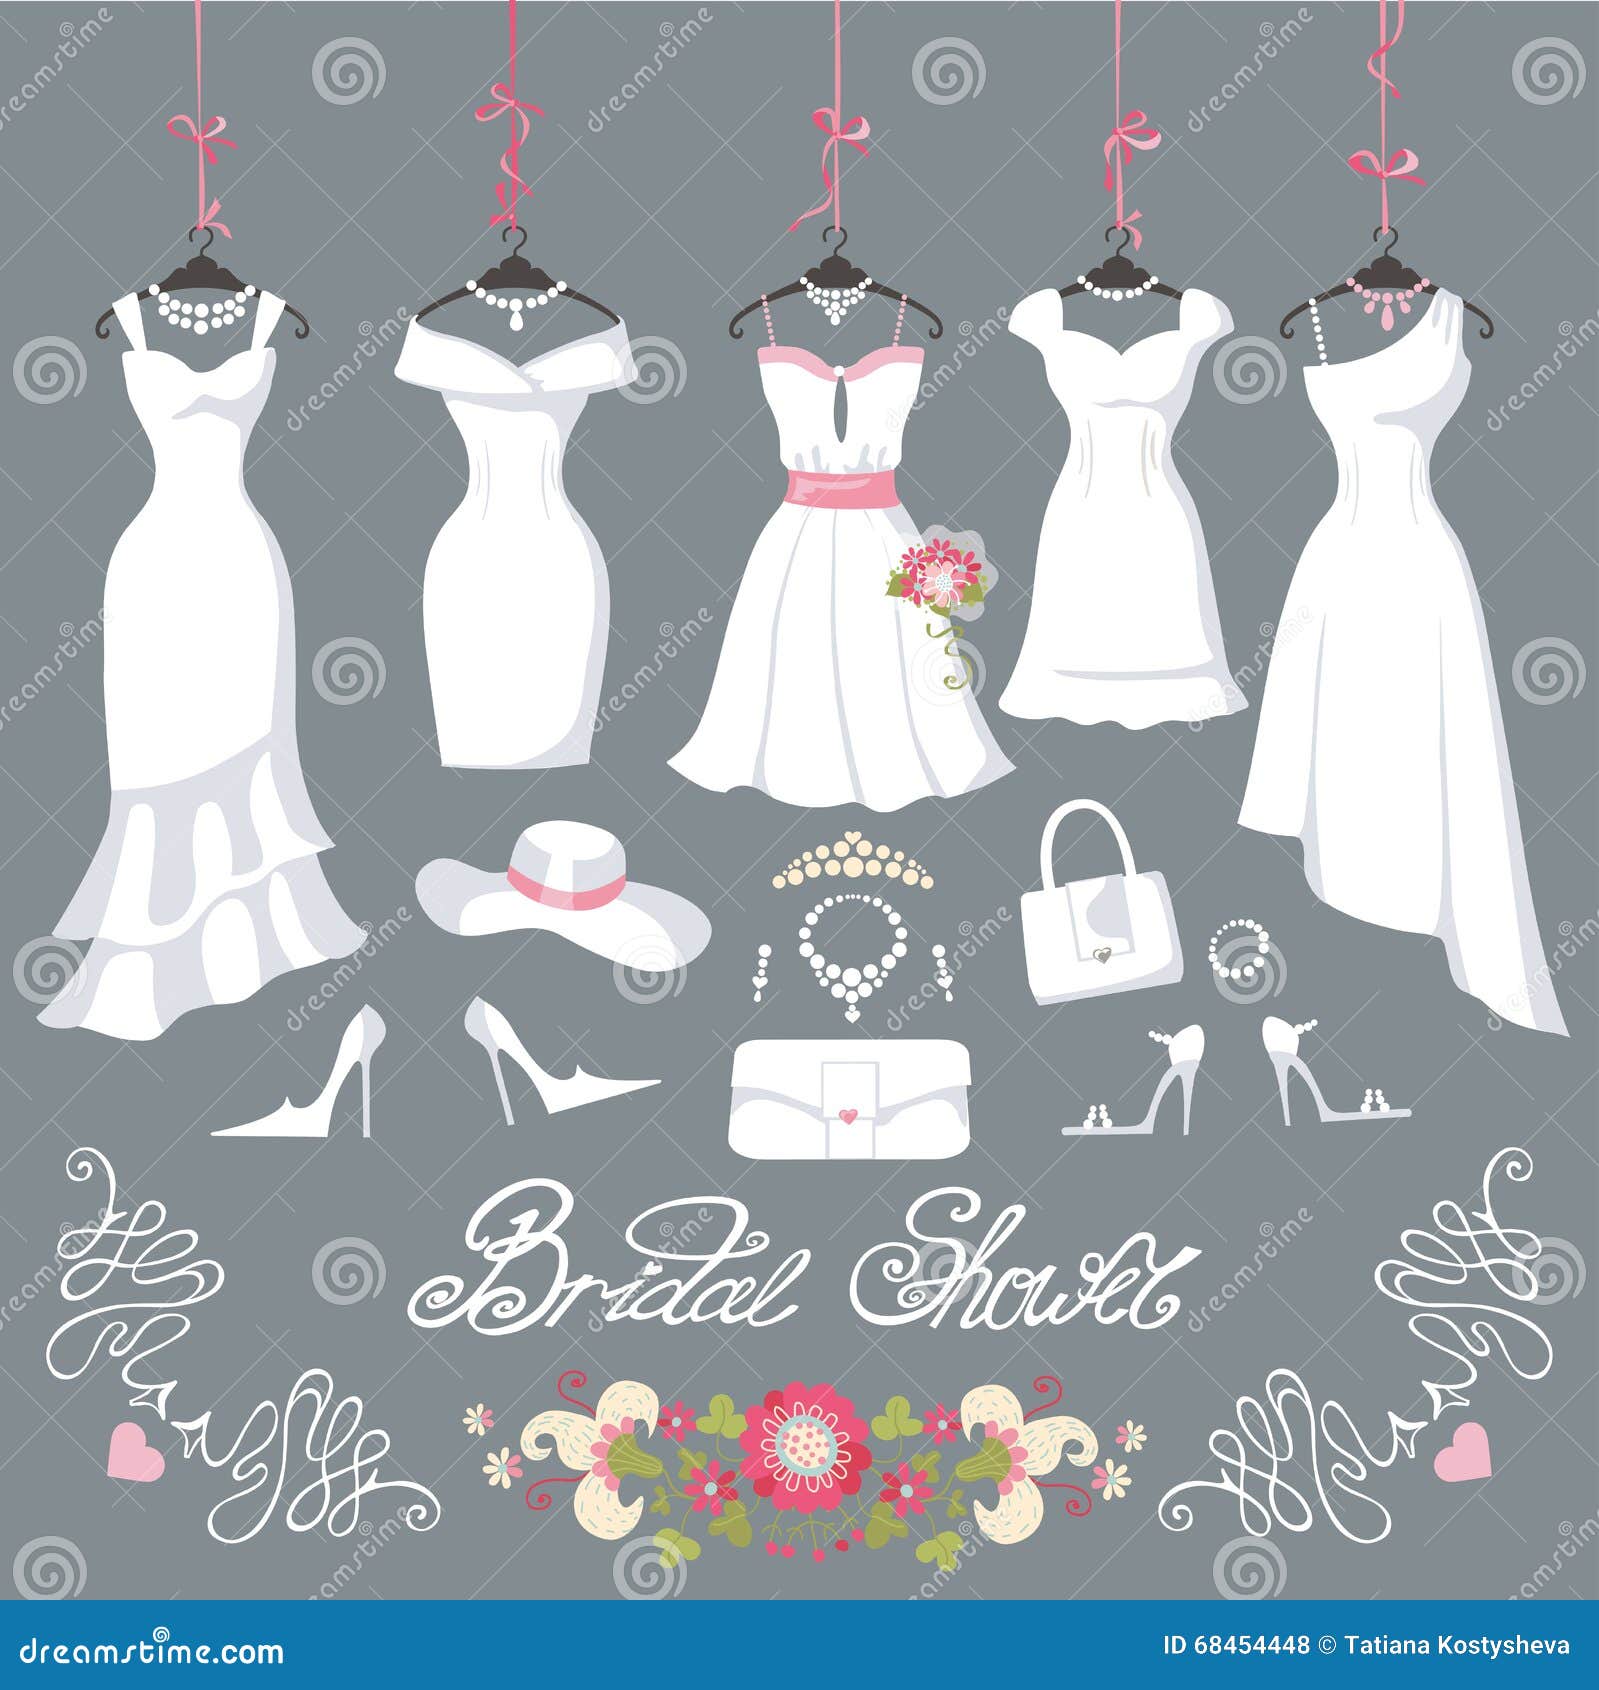 How to Choose The Right Accessories For Your Wedding Dress - Brit + Co